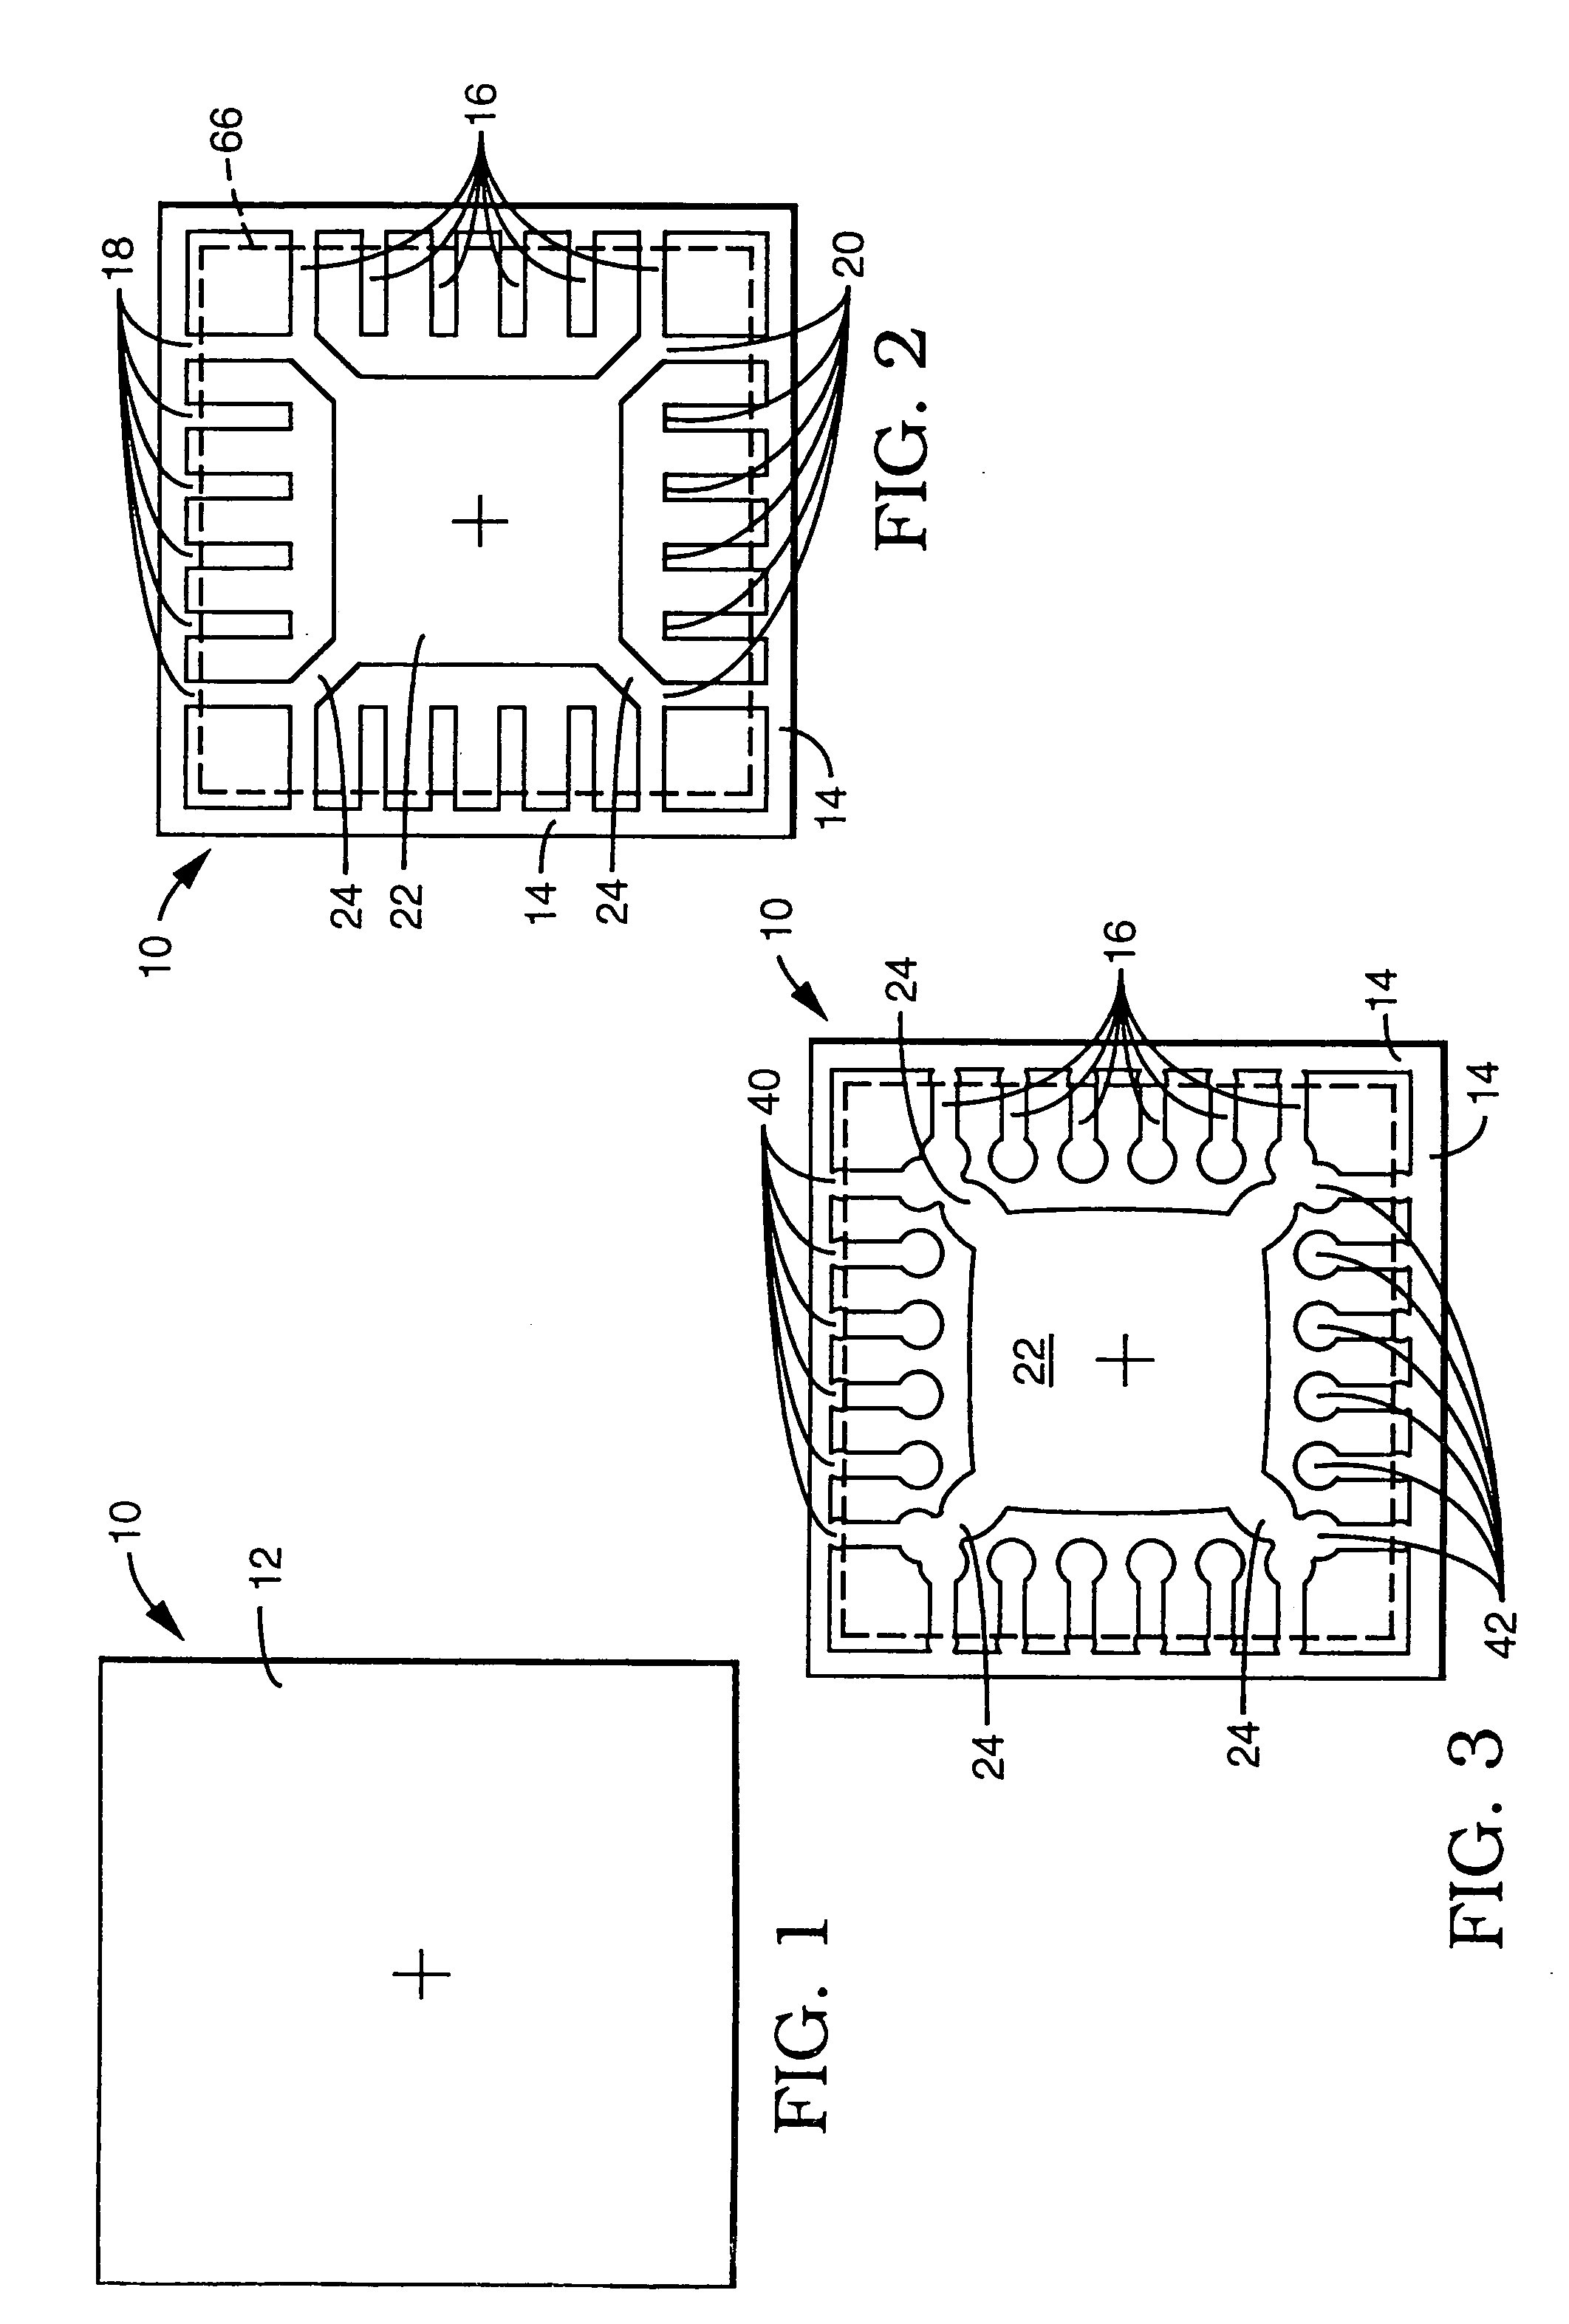 Semiconductor package with exposed die pad and body-locking leadframe